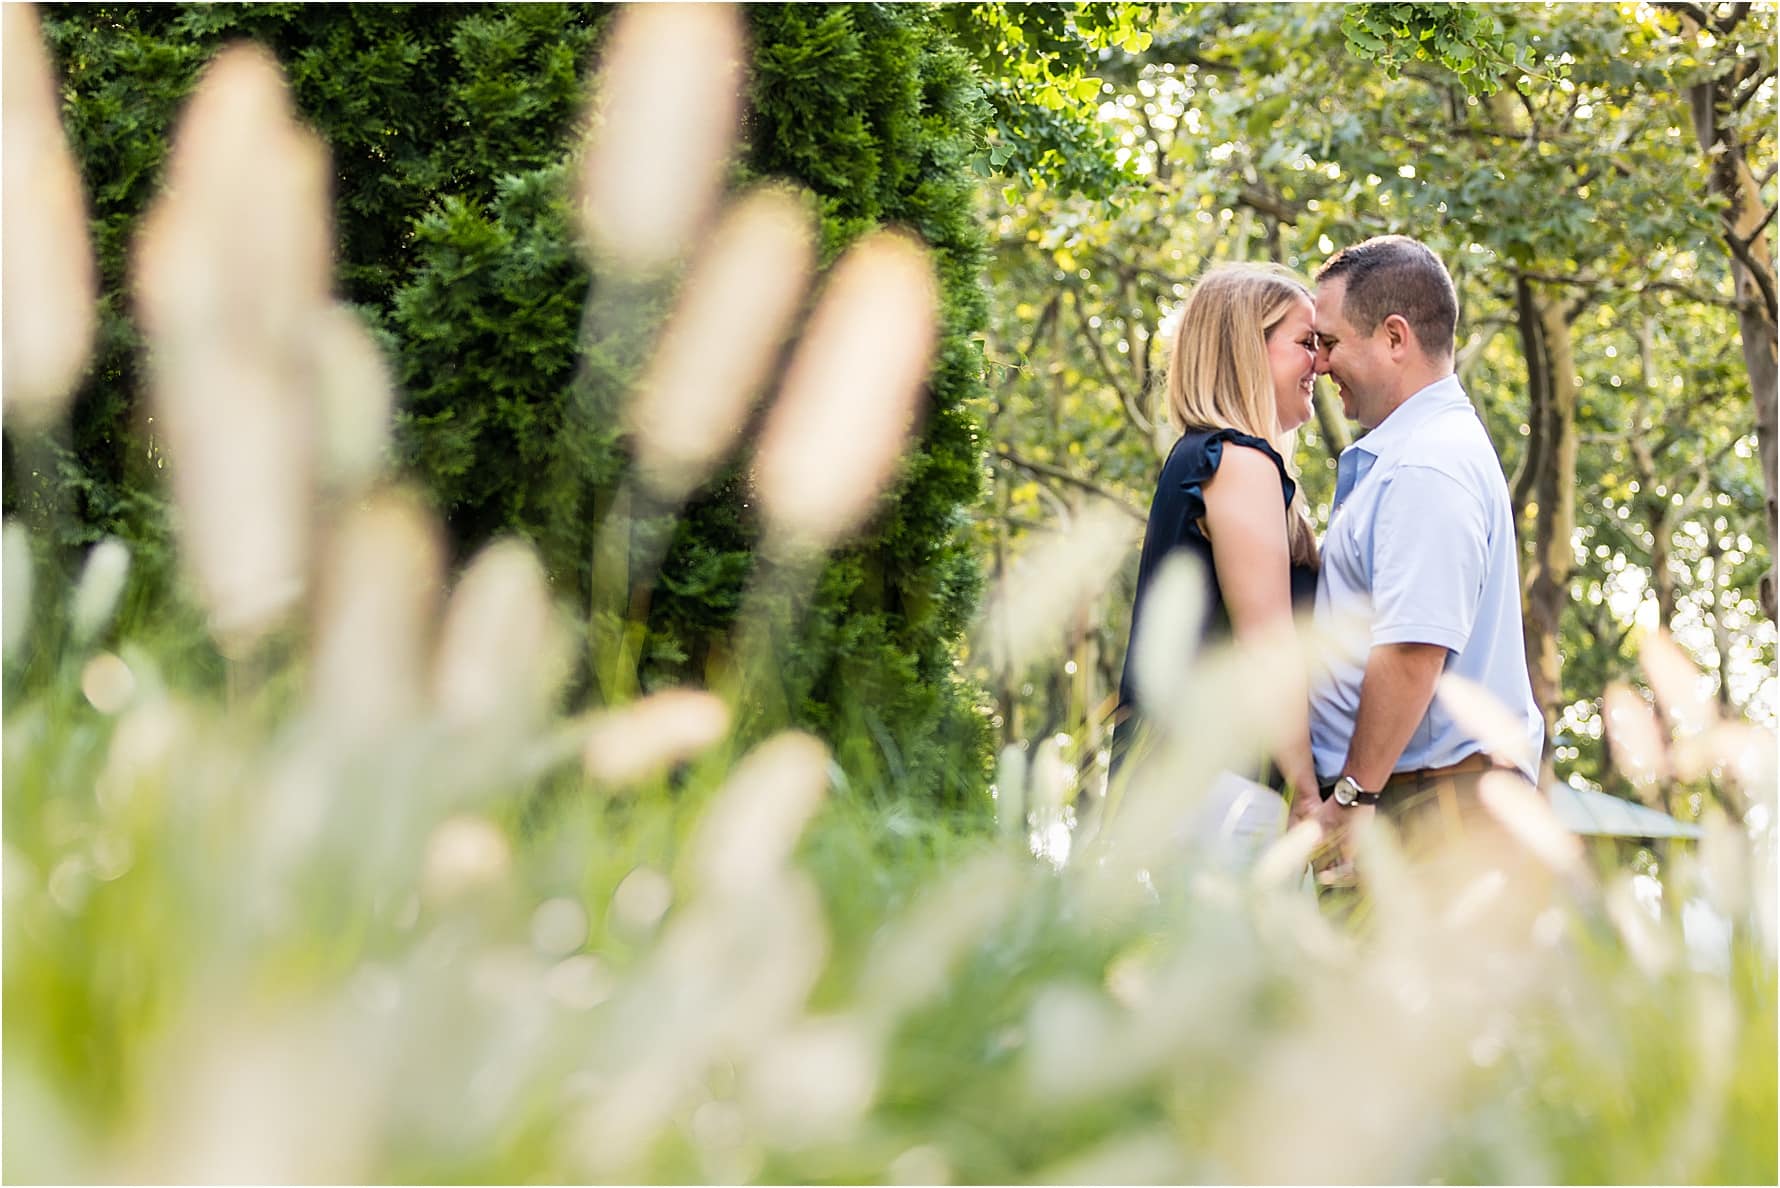 Bride and groom holding hands and smiling at one another touching foreheads as they stand in greenery and flowers